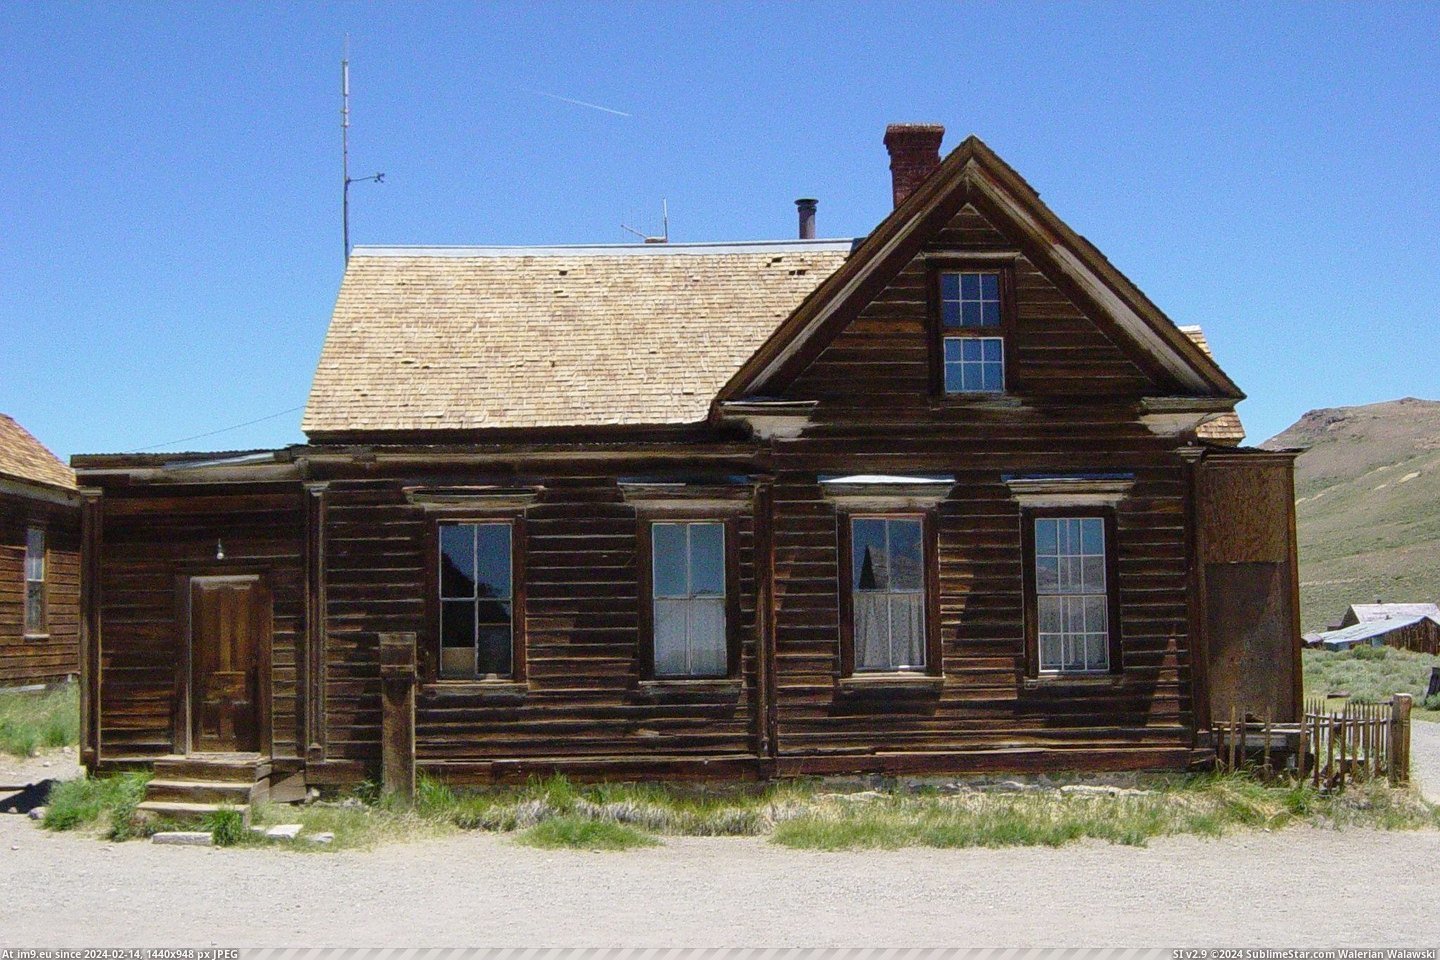 #California #James #Cain #Bodie #Residence James S. Cain Residence In Bodie, California Pic. (Image of album Bodie - a ghost town in Eastern California))